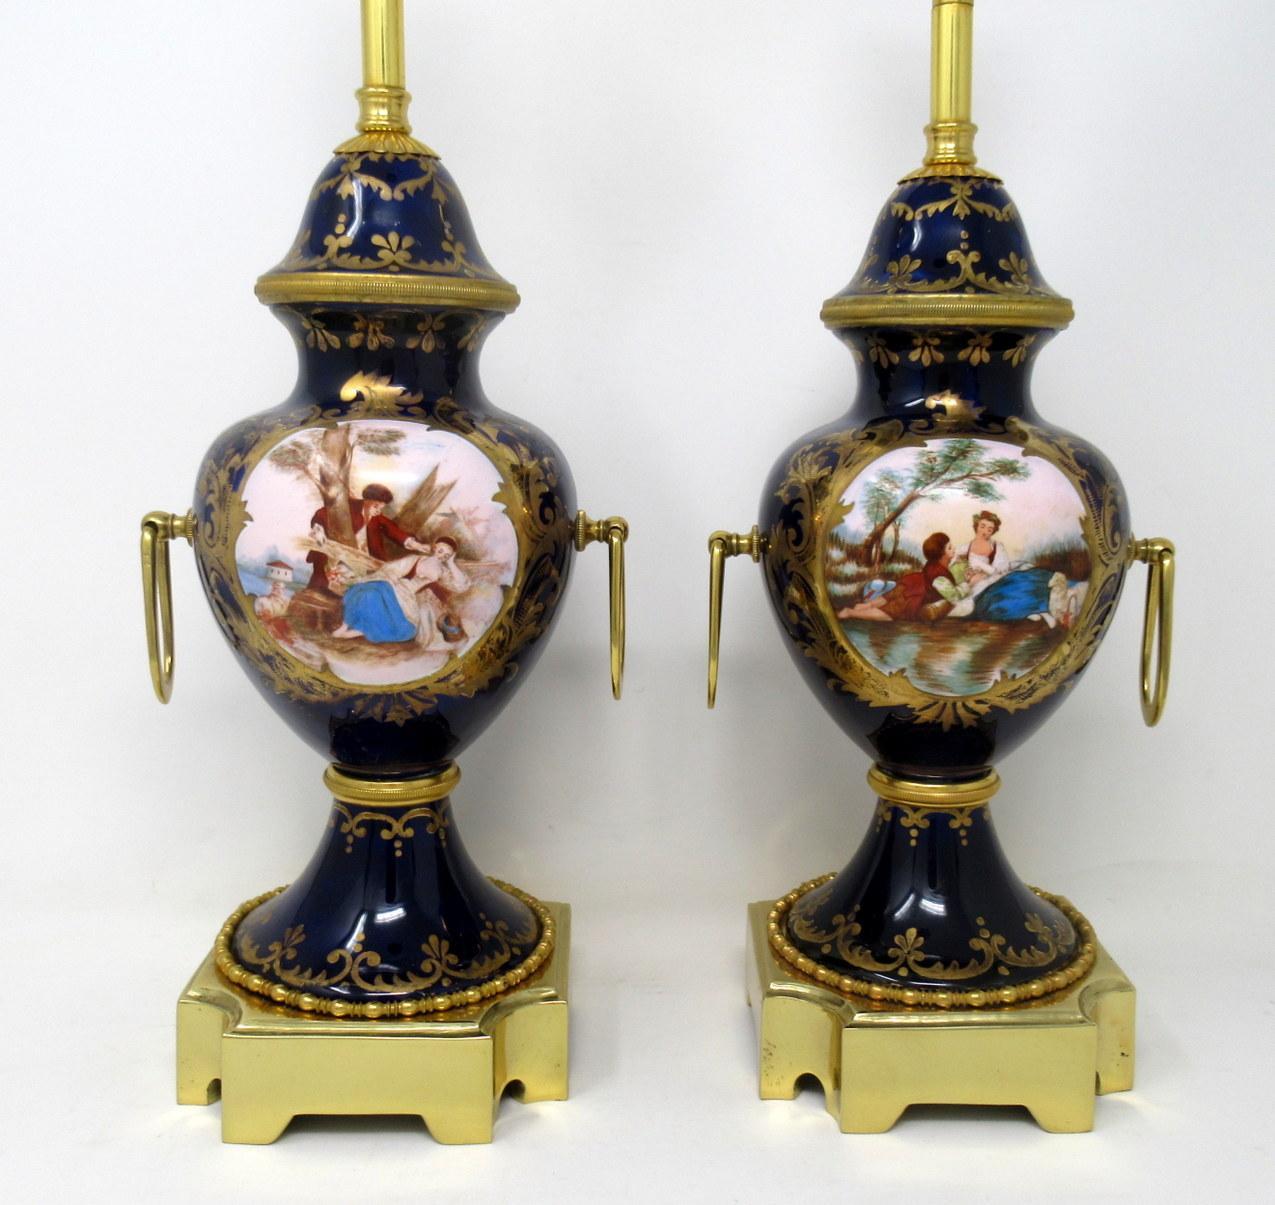 Late Victorian Pair of Antique French Sèvres Porcelain Ormolu Gilt Bronze Table Urn Lamps 